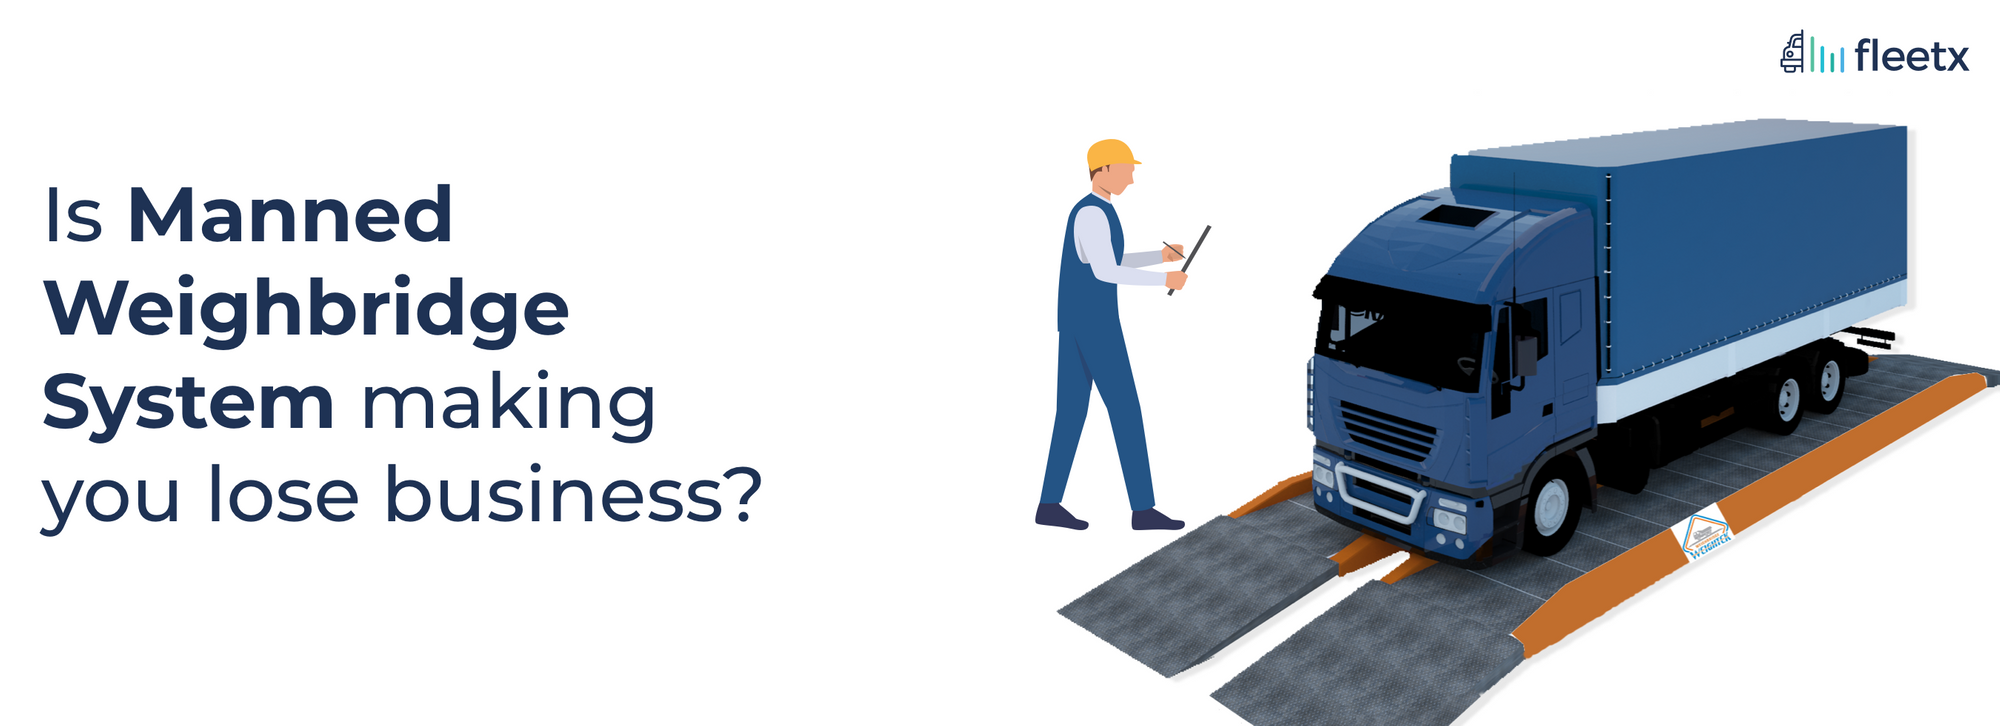 Is manned Weighbridge system making you lose business?